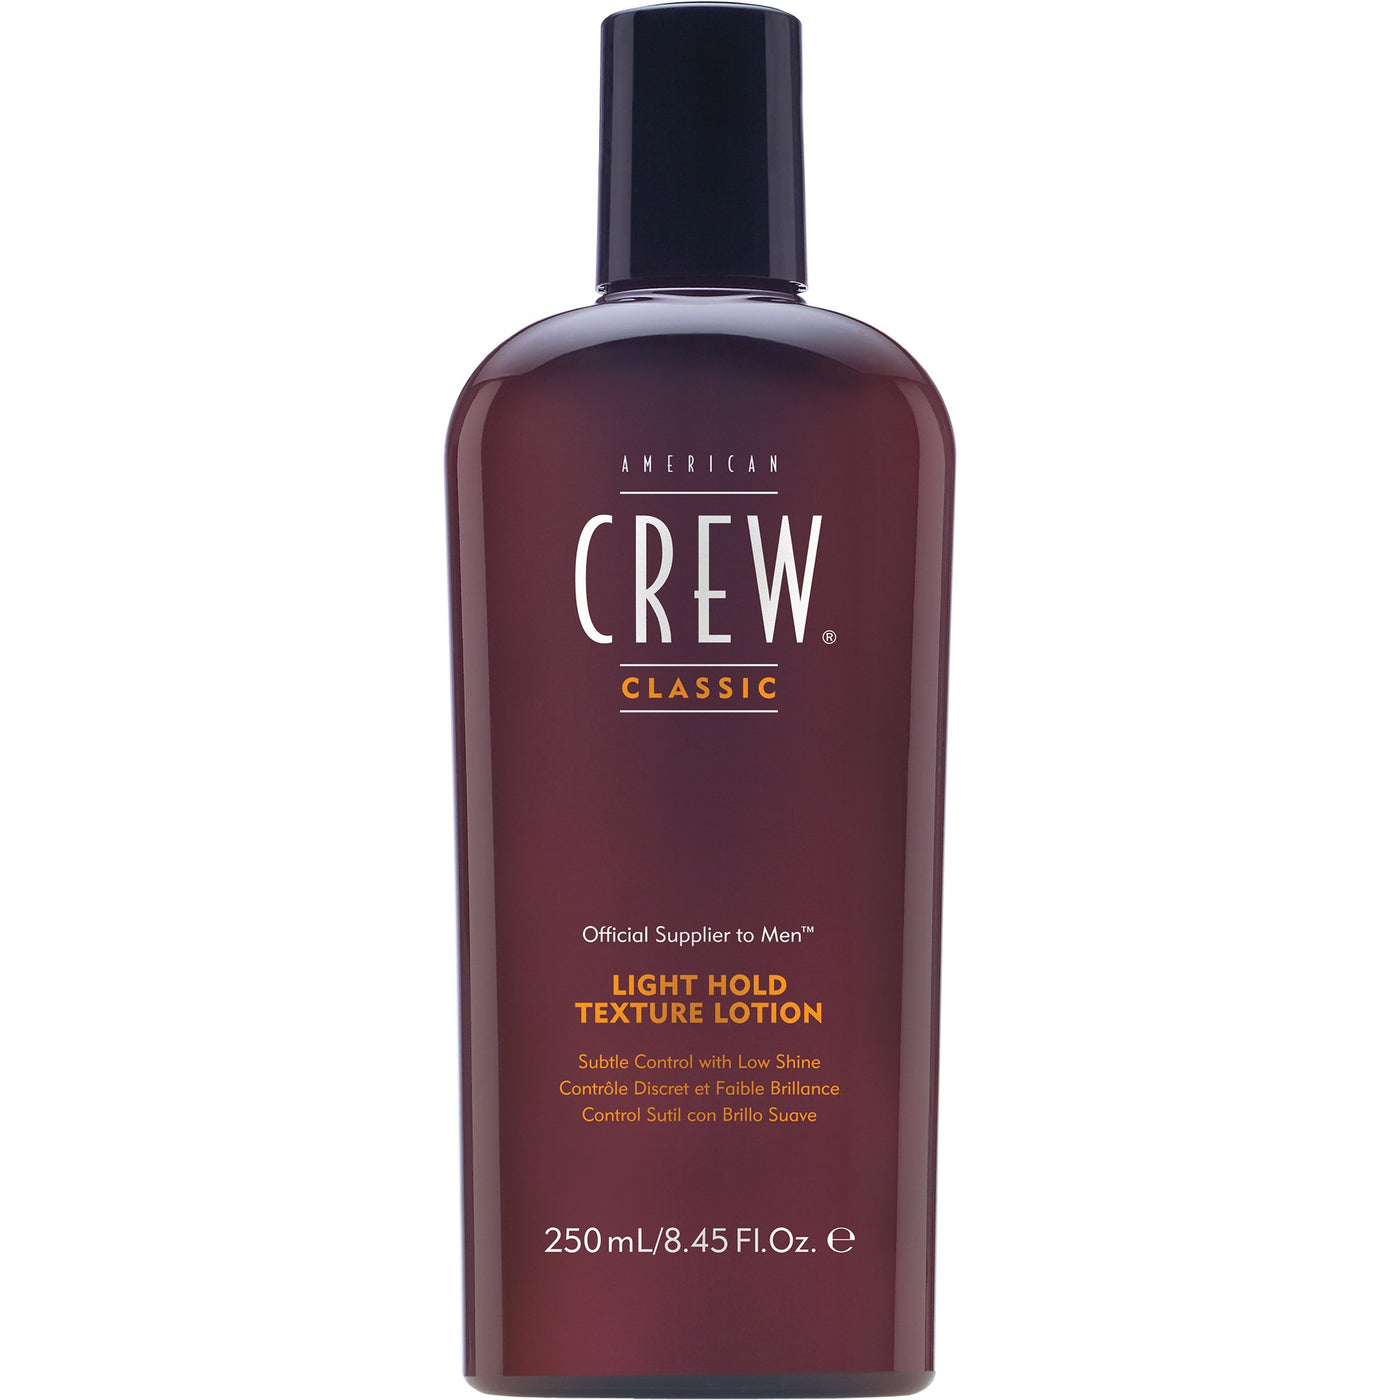 American Crew Light Hold Texture Lotion (250ml)